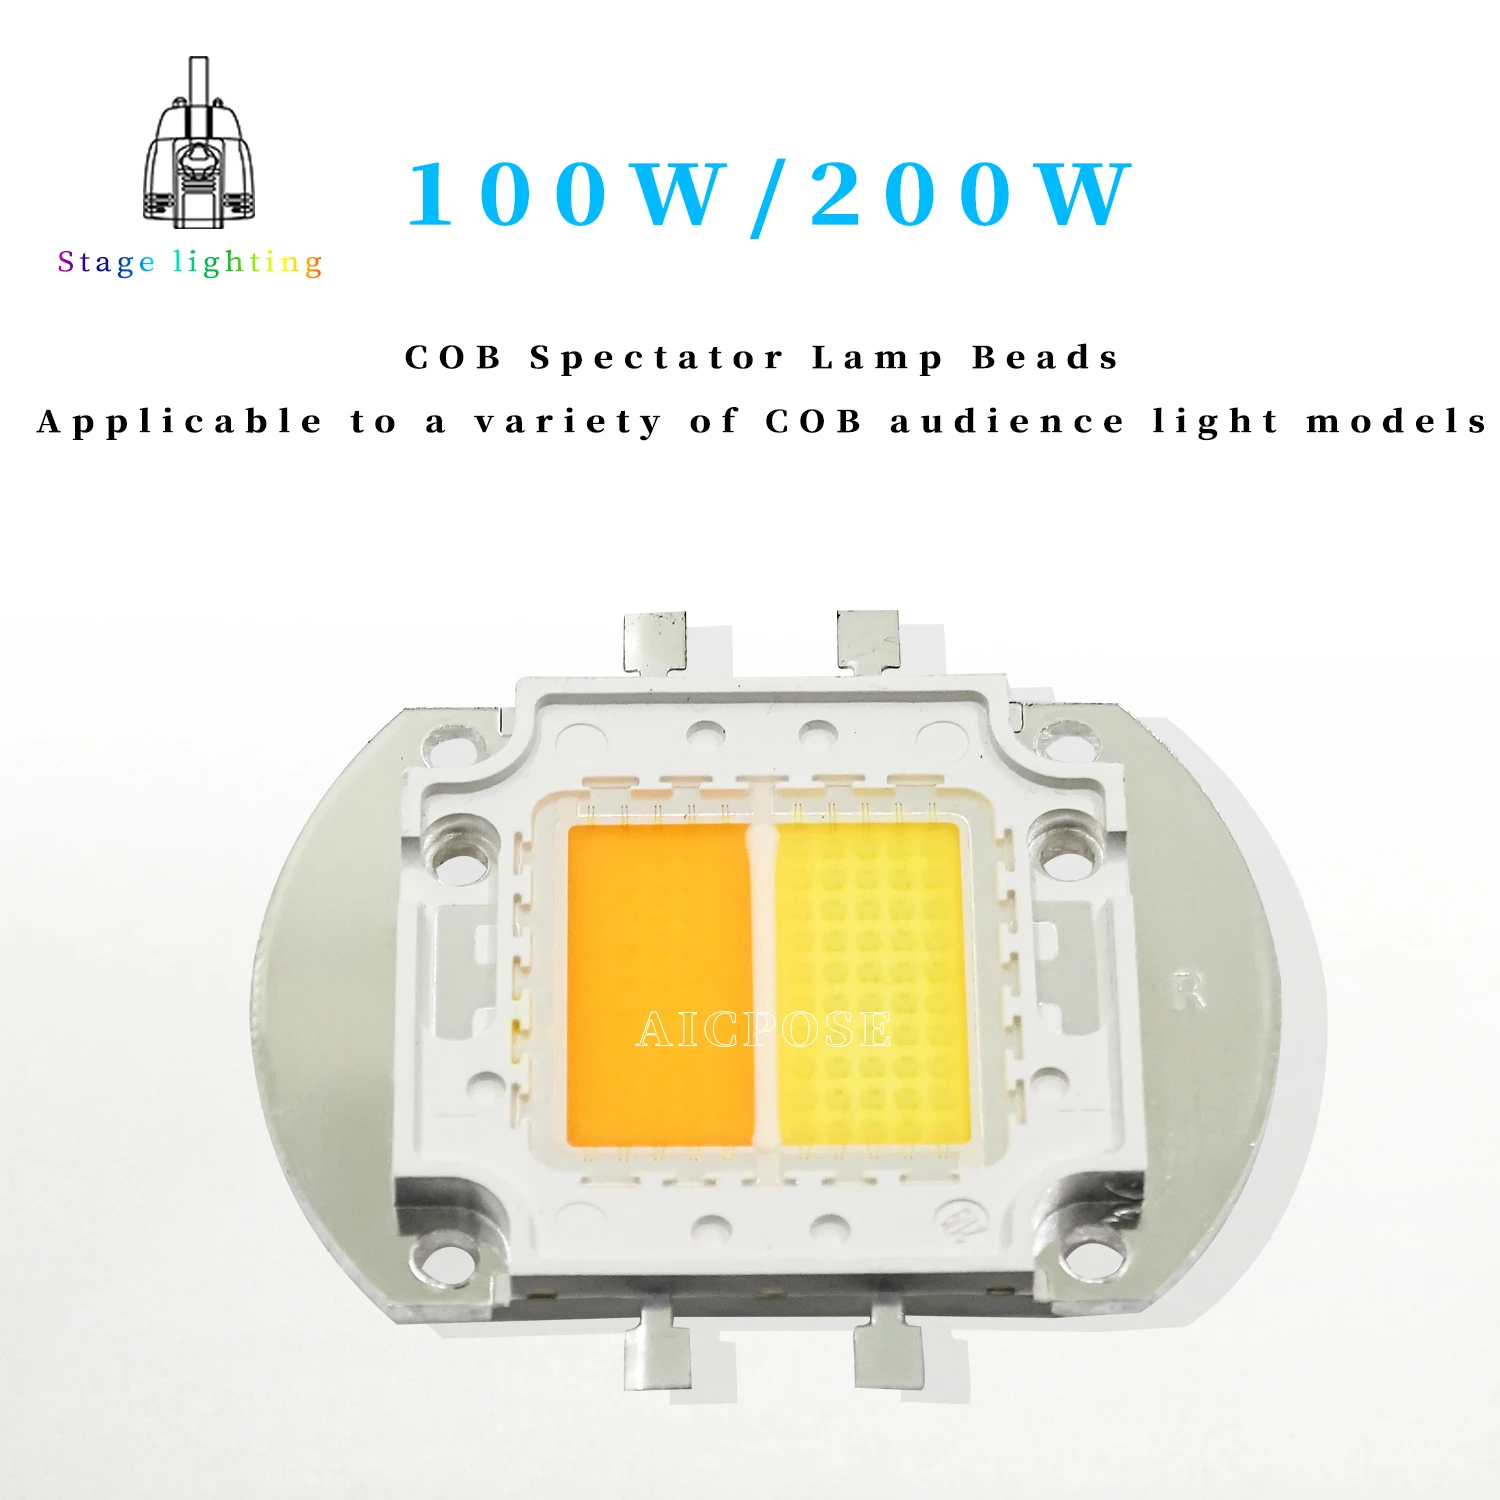 100W LED COB Beads Chip 200W Warm Cold White For 2/4 Eyes Audience Light Floodlight Lamp Spot Lighting LED COB Chips